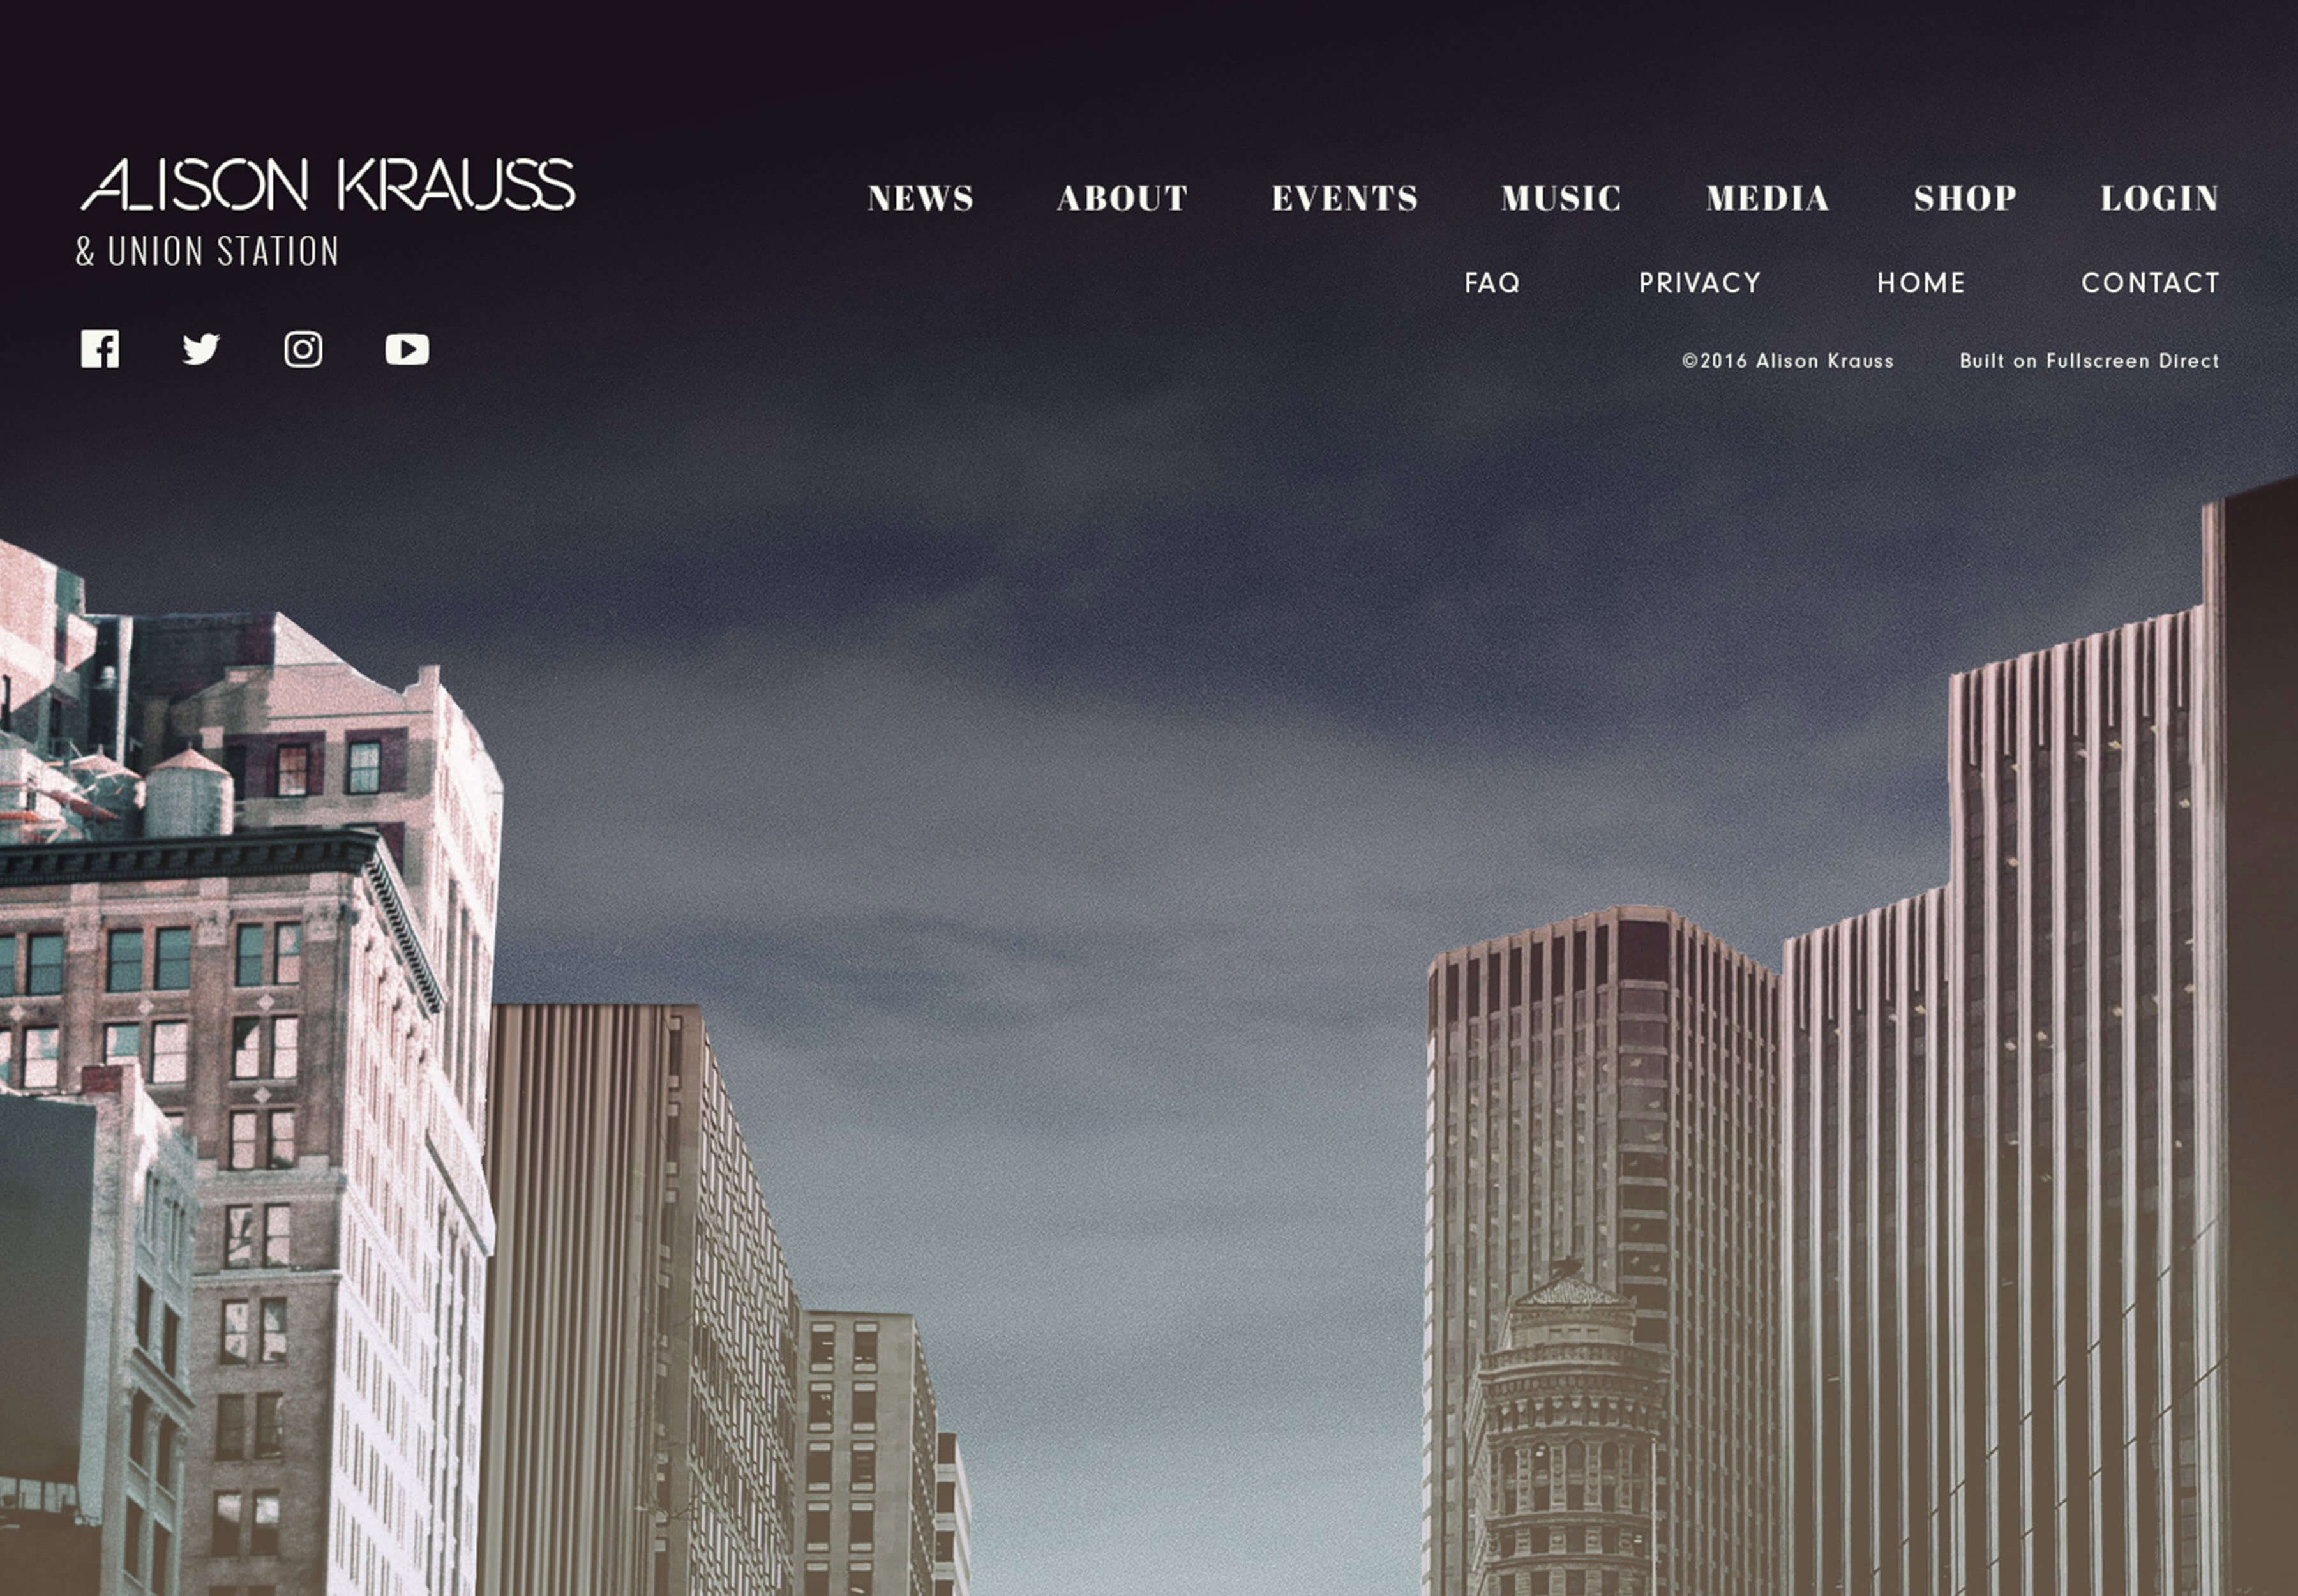 Footer image of the Alison Krauss Site.